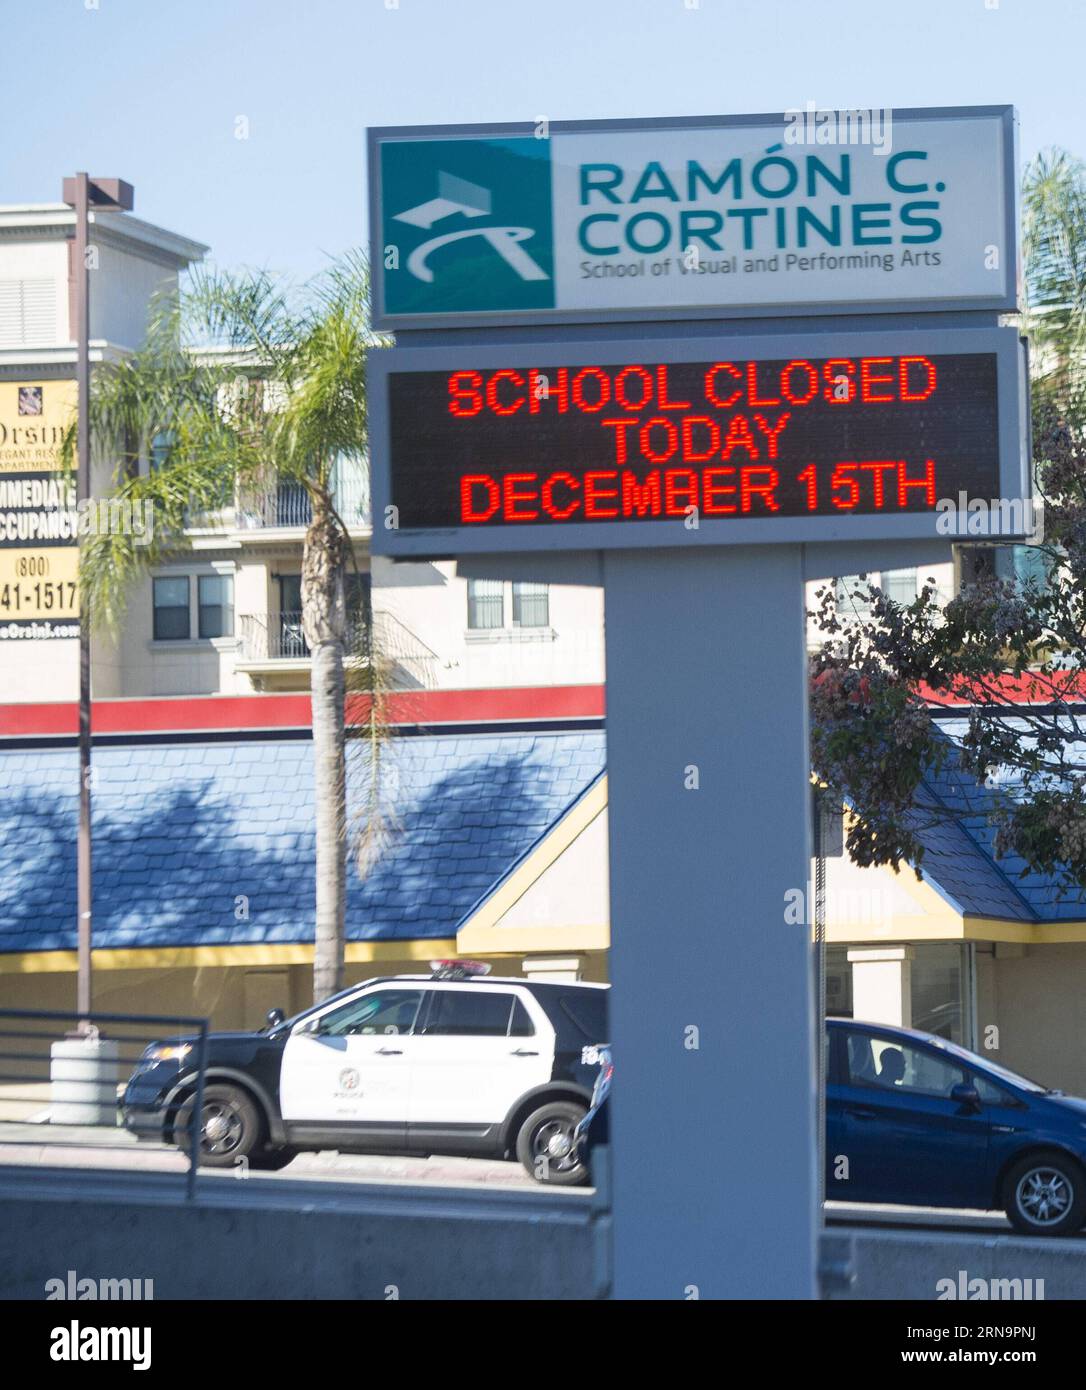 (151215) -- LOS ANGELES, Dec. 15, 2015 -- Photo taken on Dec. 15, 2015 shows a sign in front of the Ramon Cortines School of Visual and Performing Arts in Los Angeles, the United States. All Los Angeles Unified School District (LAUSD) schools will stay closed today in response to a reported bomb threat, Schools Superintendent Ramon Cortines said. Police said the threat was called in to a School Board member. The threat is involving backpacks and packages left at campuses. The closures applied to all LAUSD campuses, around 900 of them. Los Angeles Unified School District is the second-largest s Stock Photo